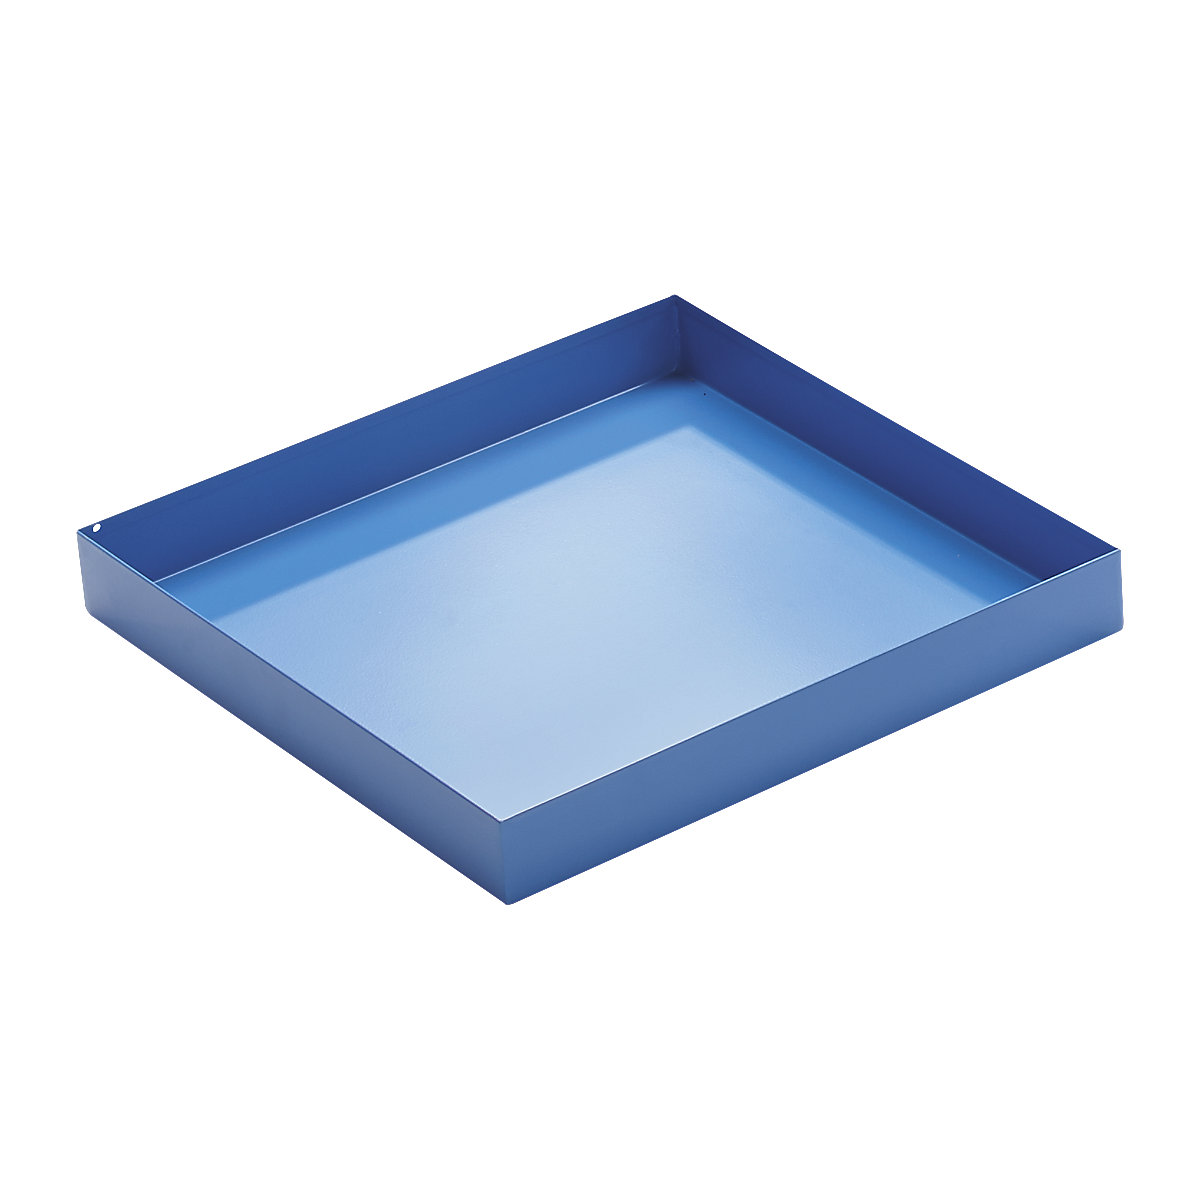 Steel sump tray for small containers - eurokraft basic